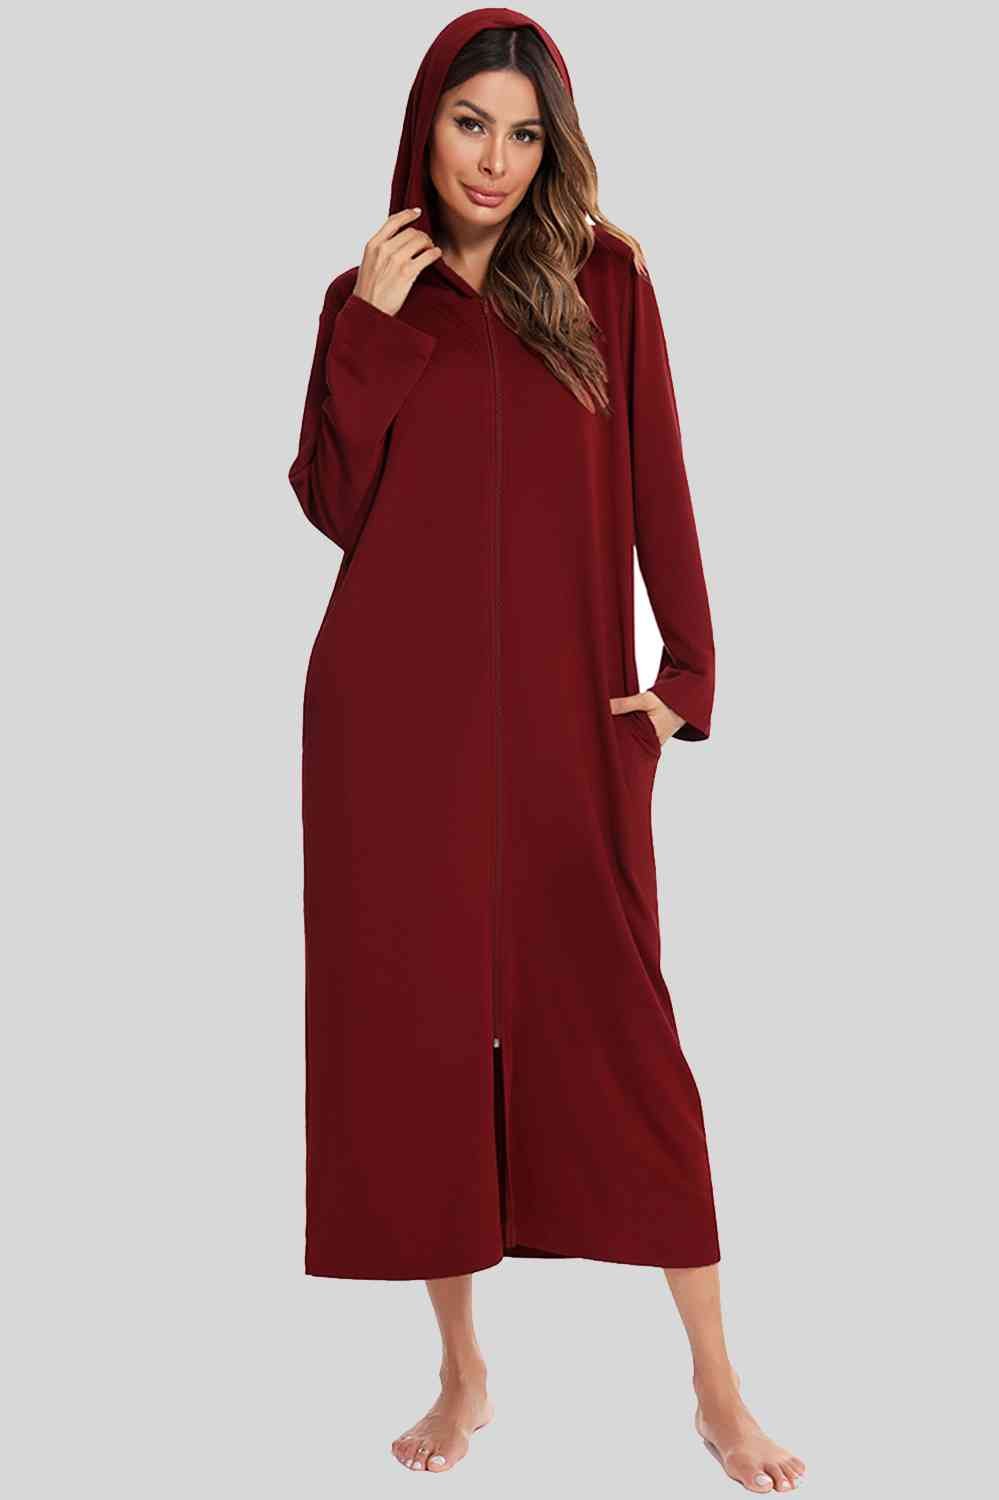 Zip Front Hooded Night Dress with Pockets - GemThreads Boutique